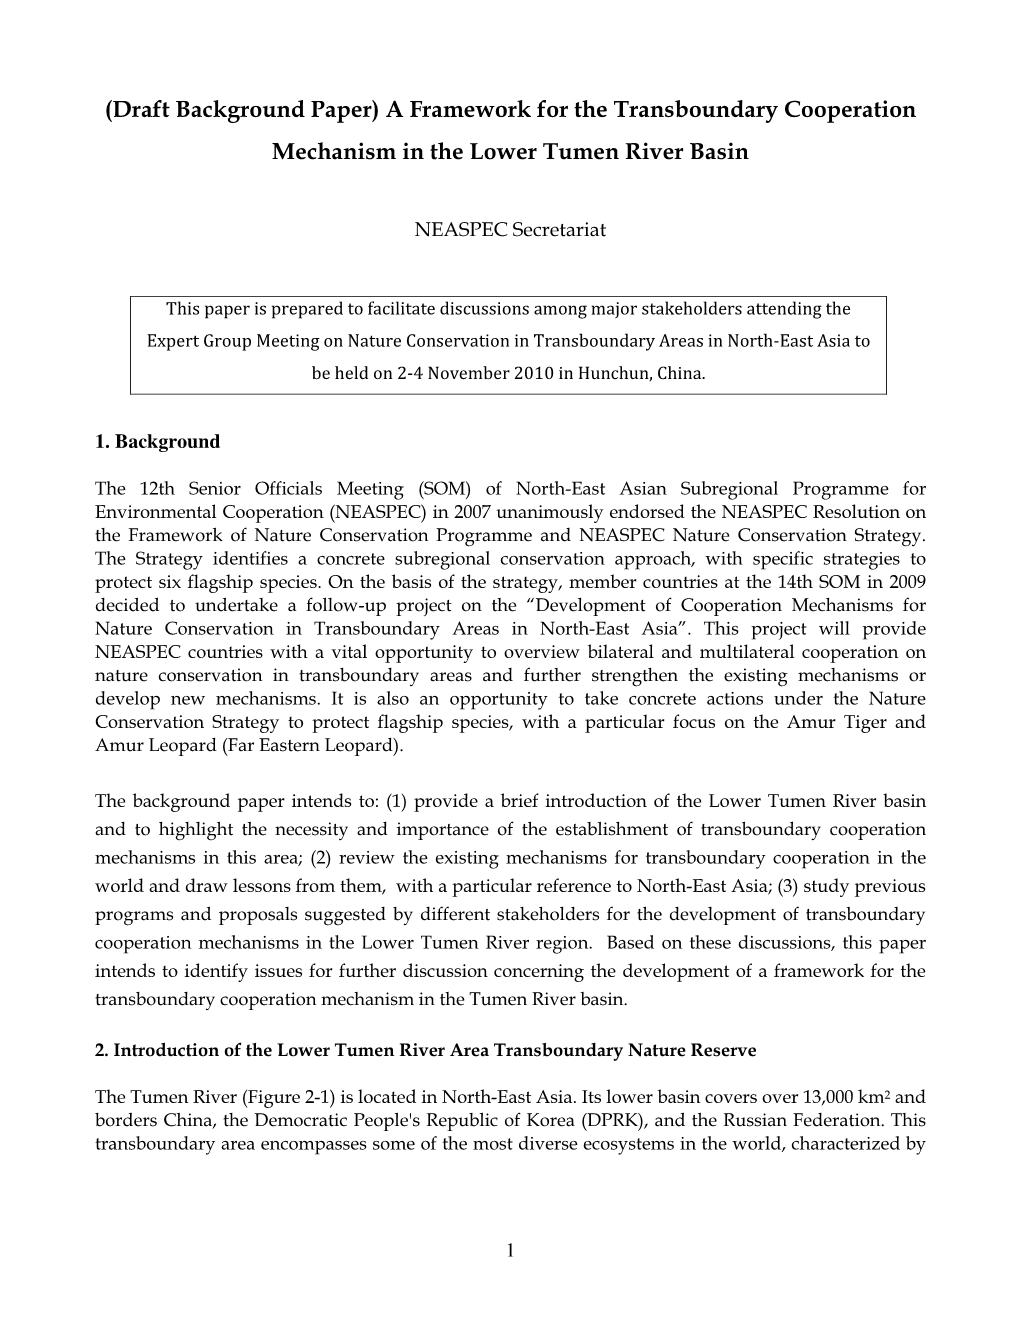 (Draft Background Paper) a Framework for the Transboundary Cooperation Mechanism in the Lower Tumen River Basin